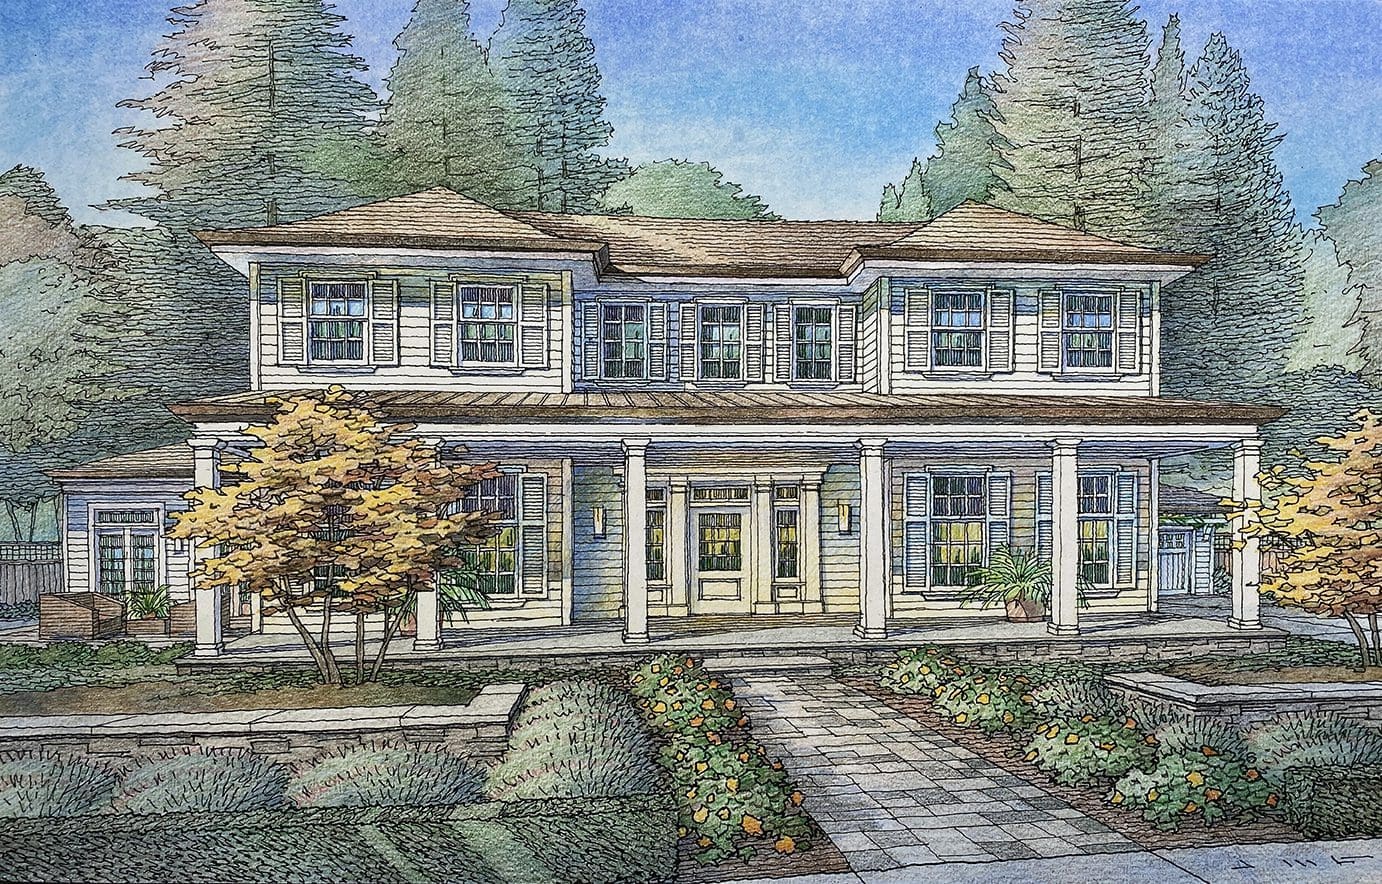 Architectural Renderings of Atherton Residence Under Construction